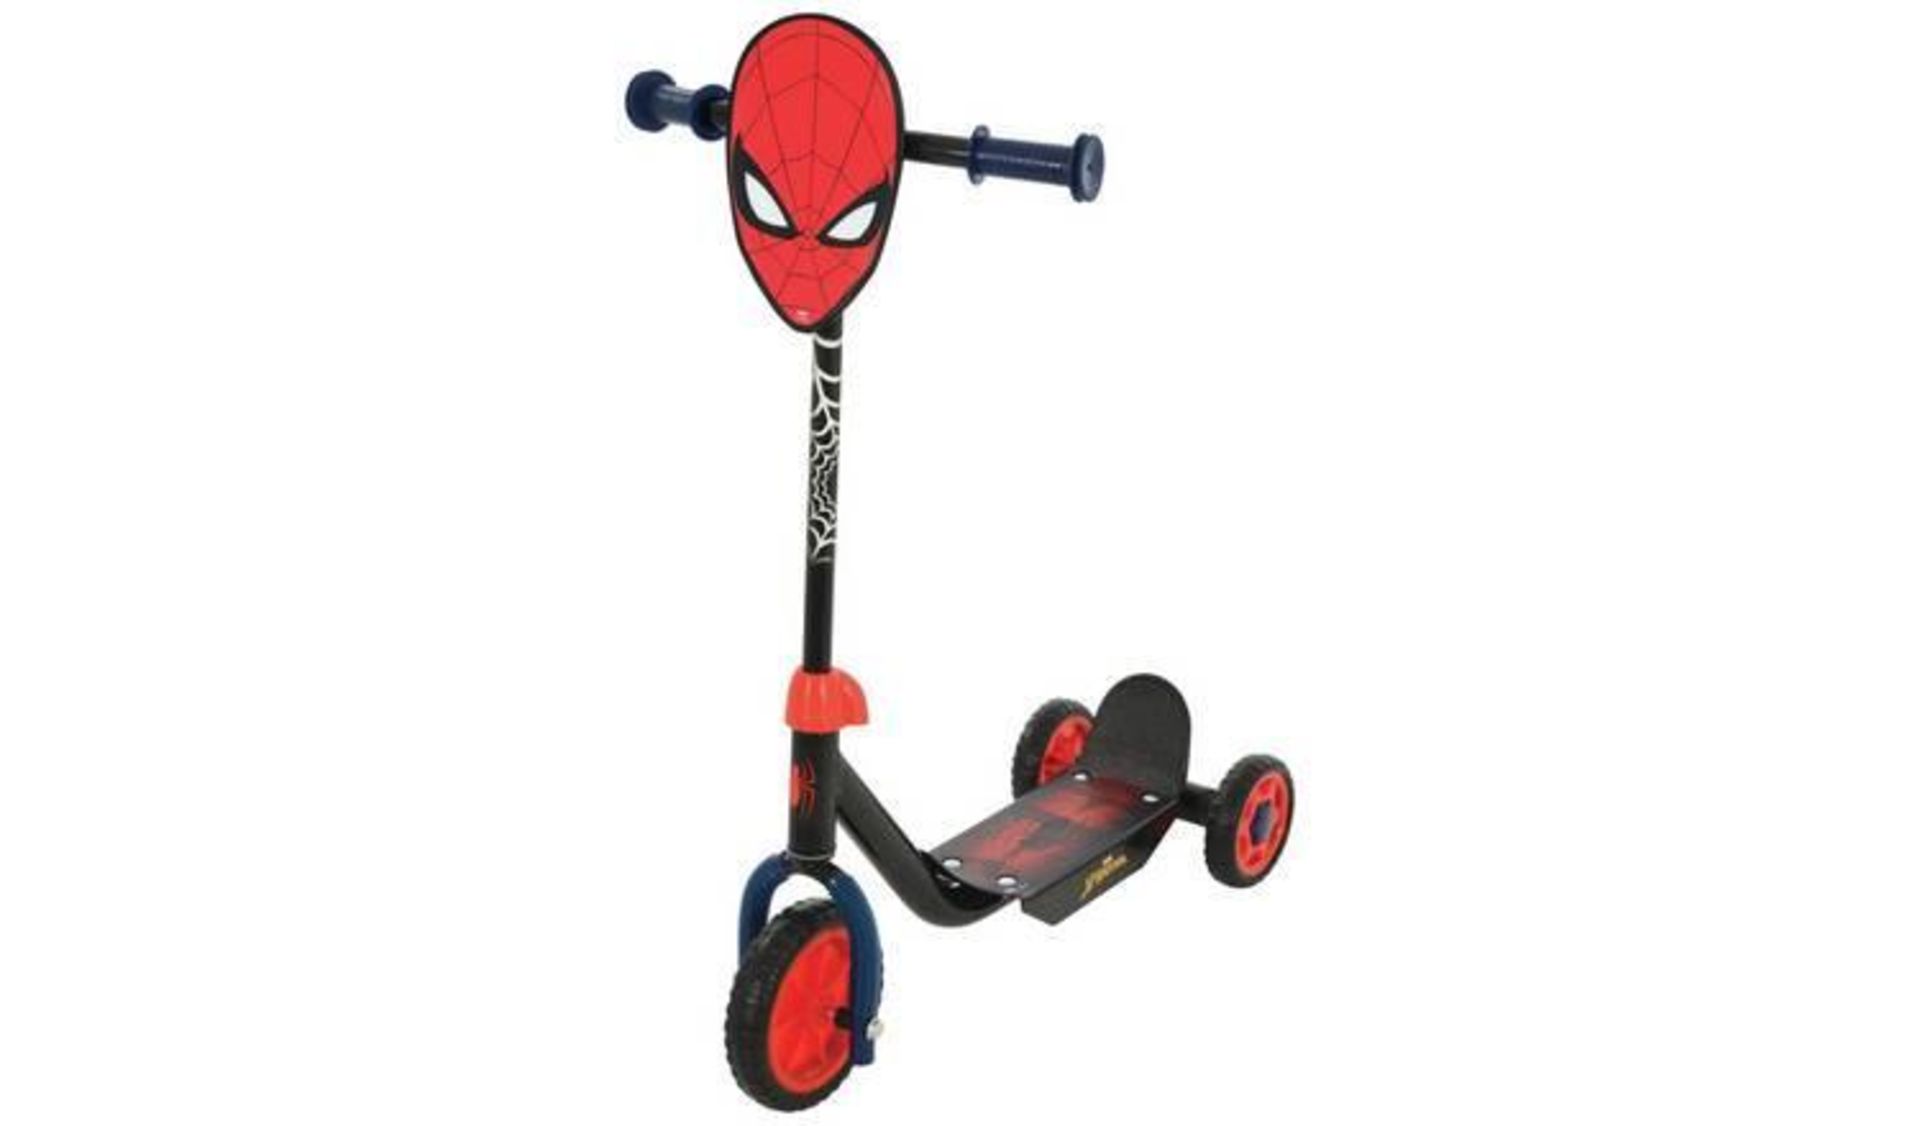 Marvel Spider-Man Deluxe Tri Scooter, £17.99 RRP